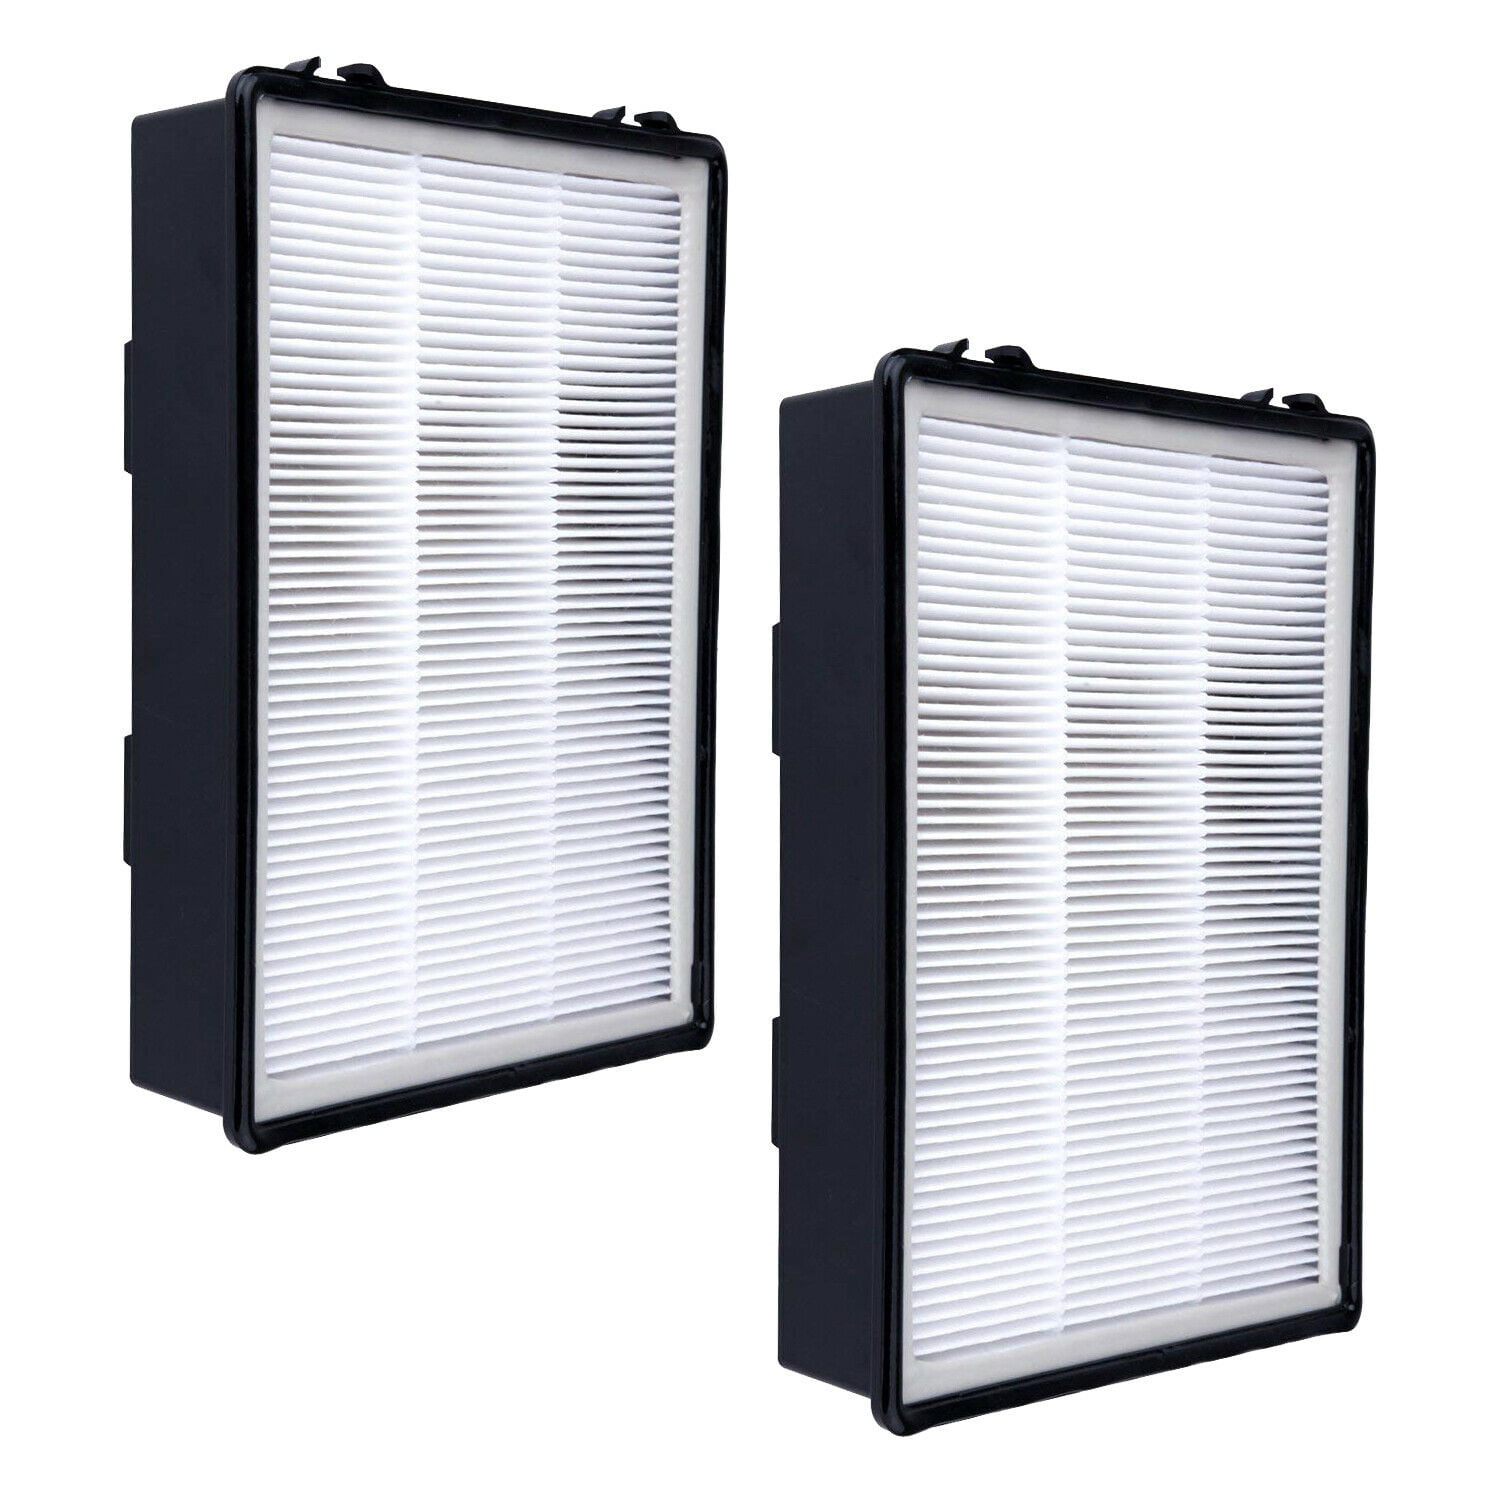 2pcs Filters Replacements For Holmes B Filters HAP616B-TU Air Purifiers 